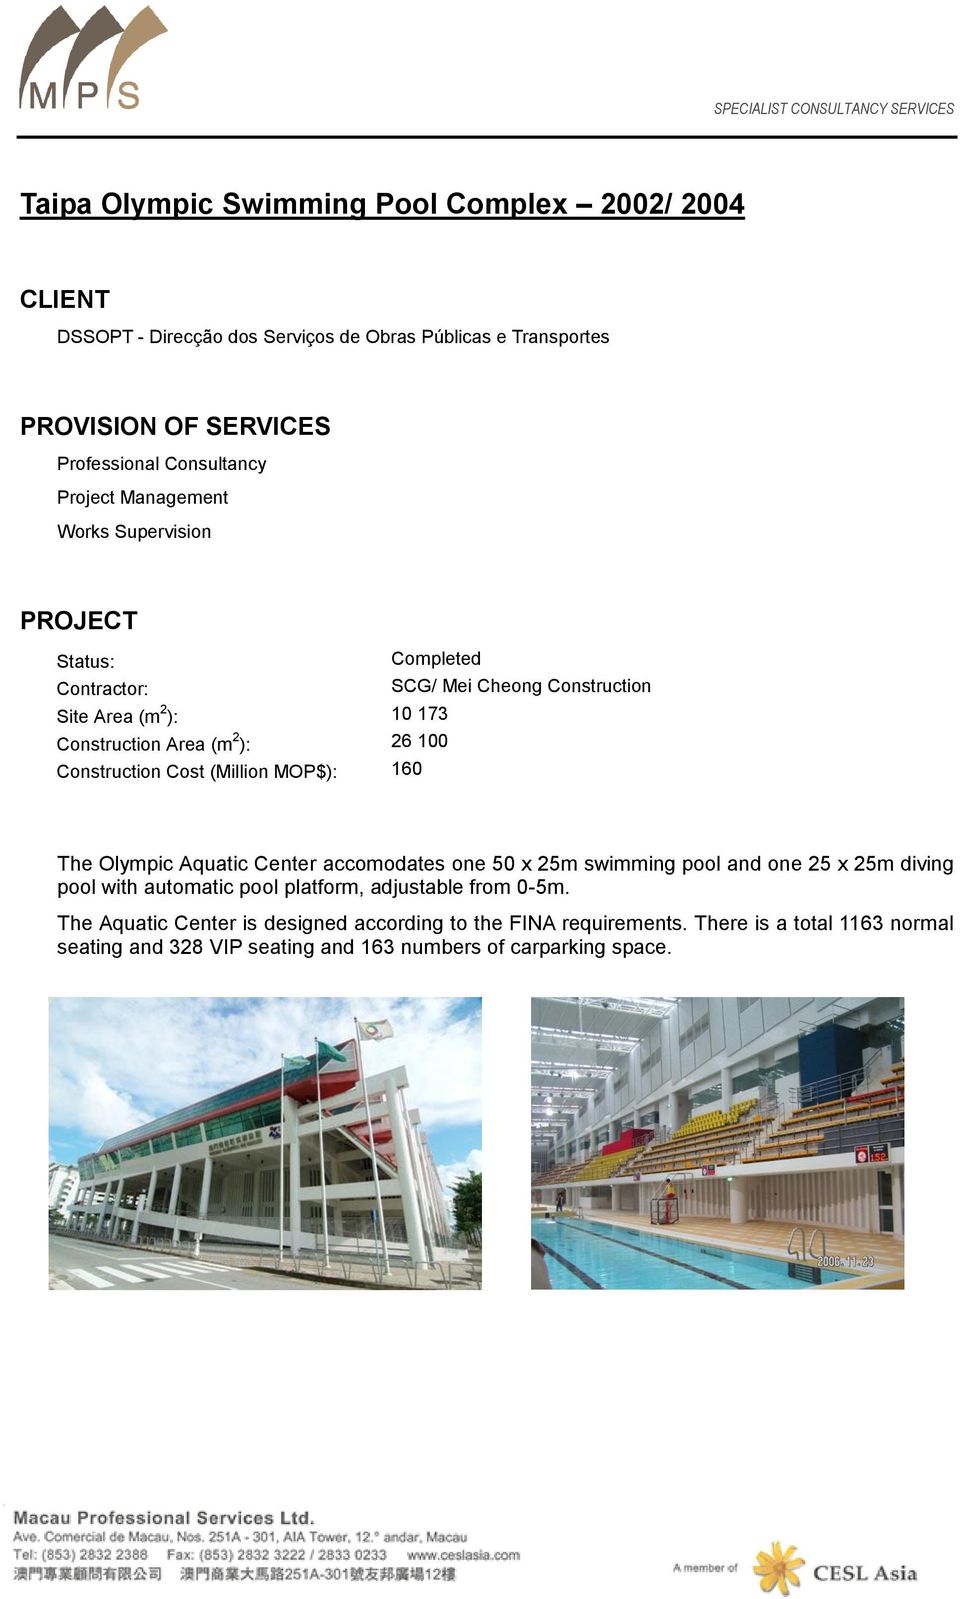 Construction Cost (Million MOP$): 160 The Olympic Aquatic Center accomodates one 50 x 25m swimming pool and one 25 x 25m diving pool with automatic pool platform,